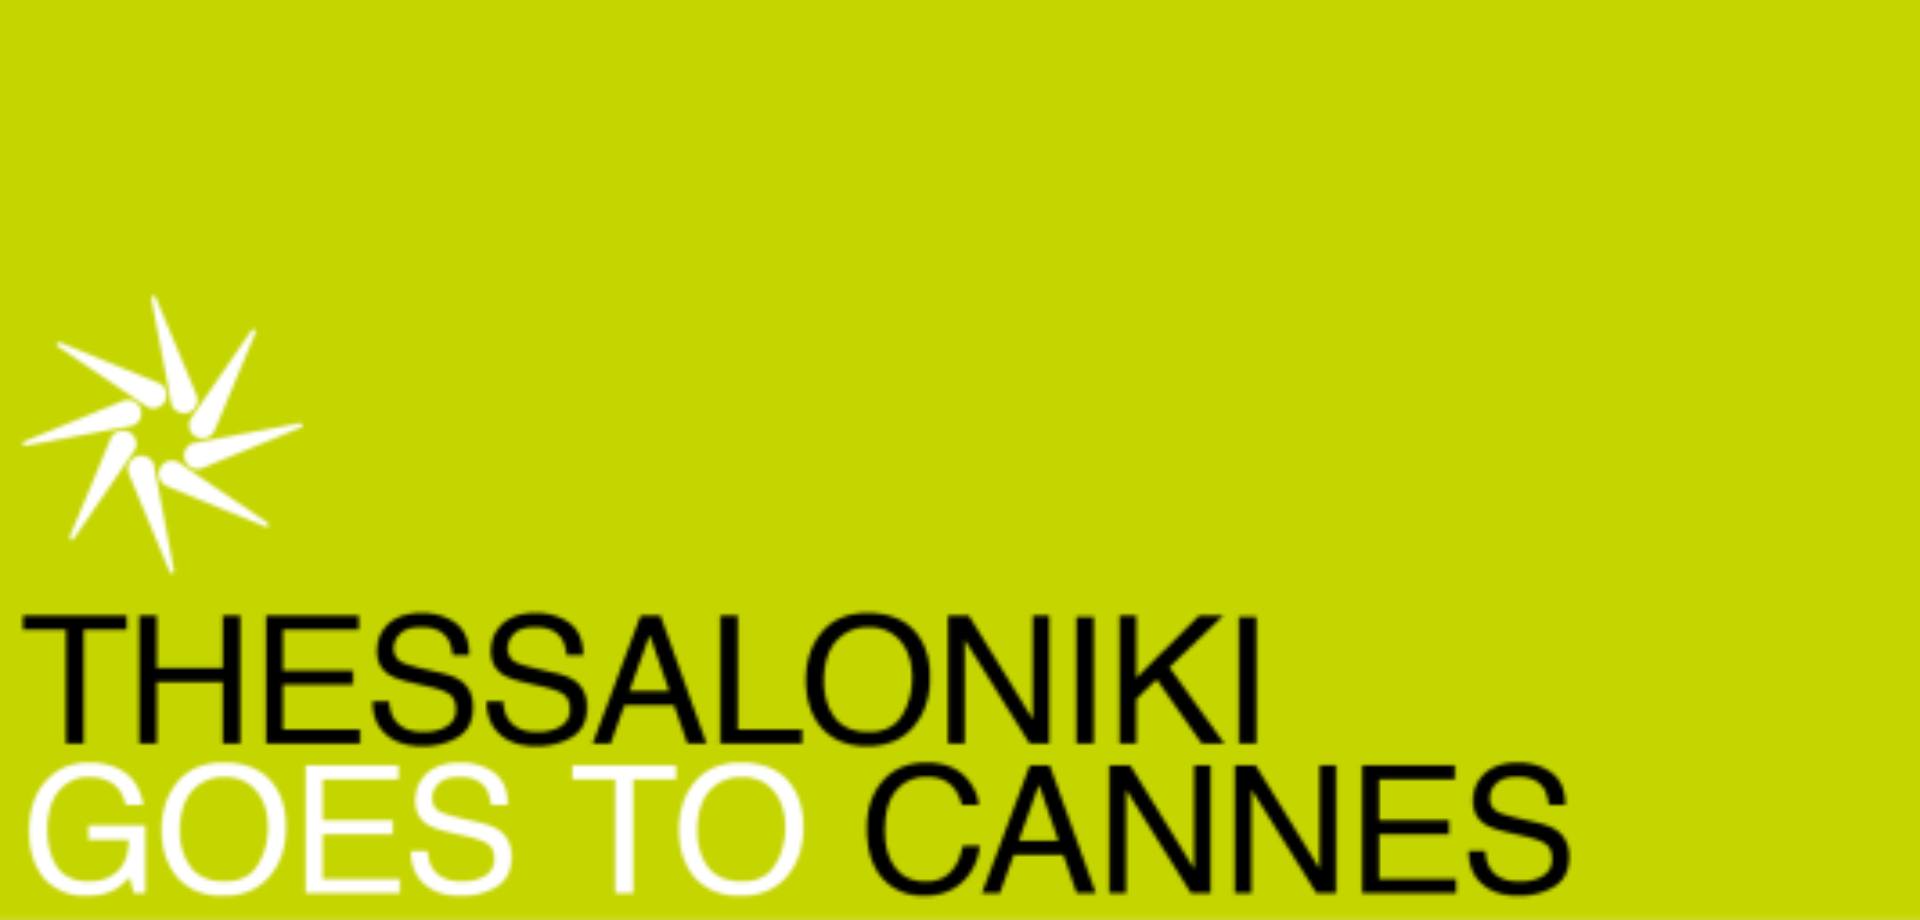 THESSALONIKI GOES TO CANNES